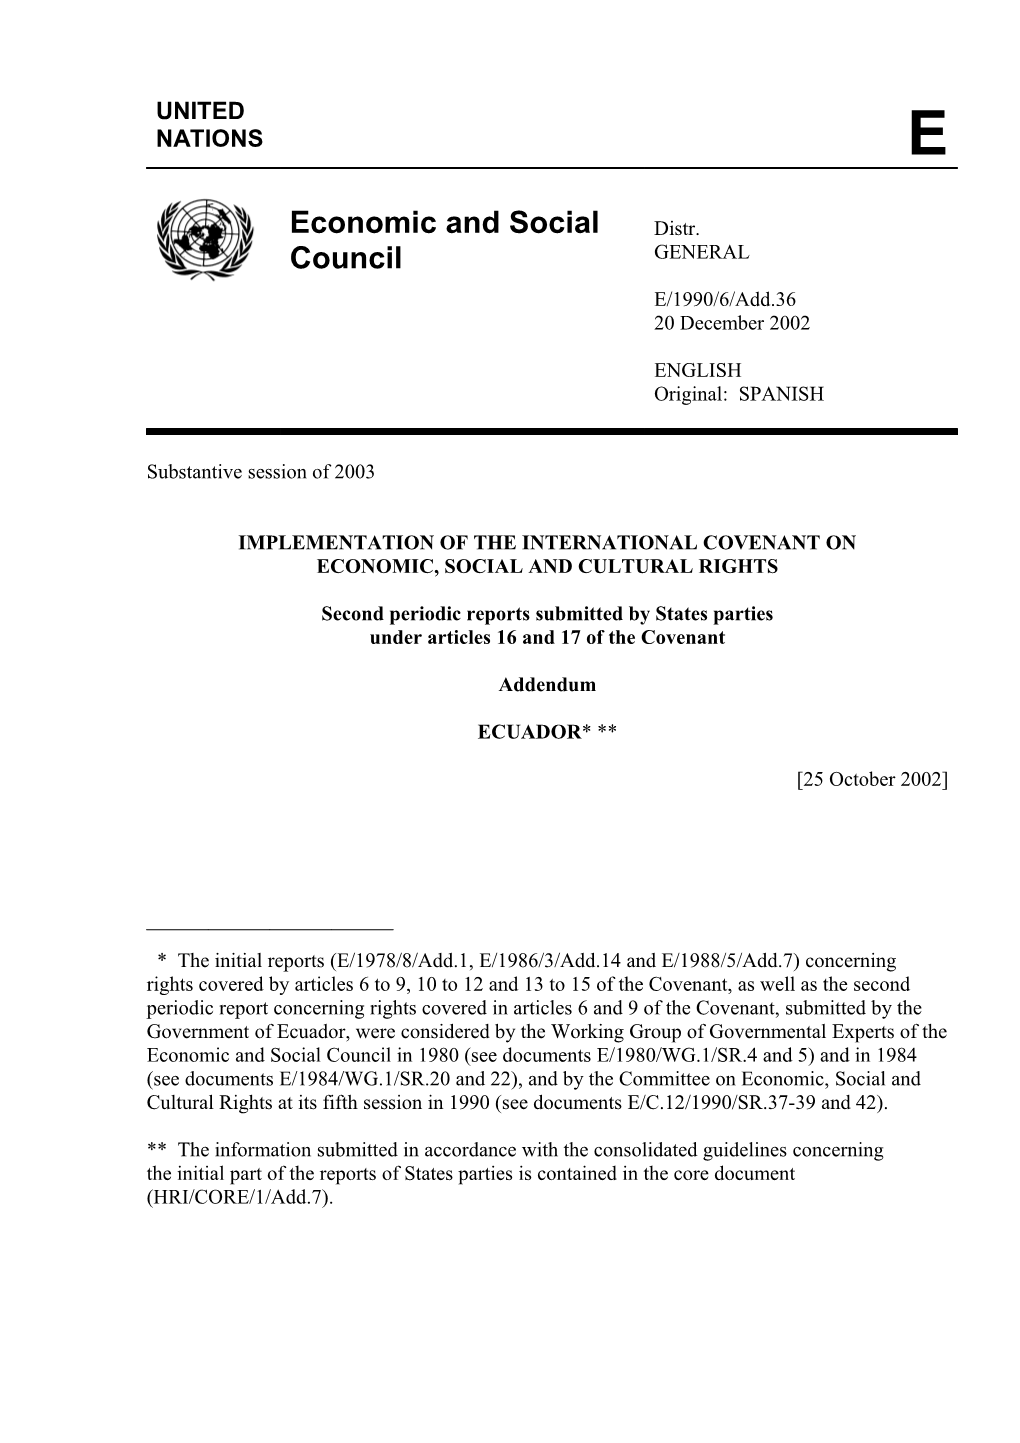 Implementation of the International Covenant On s1